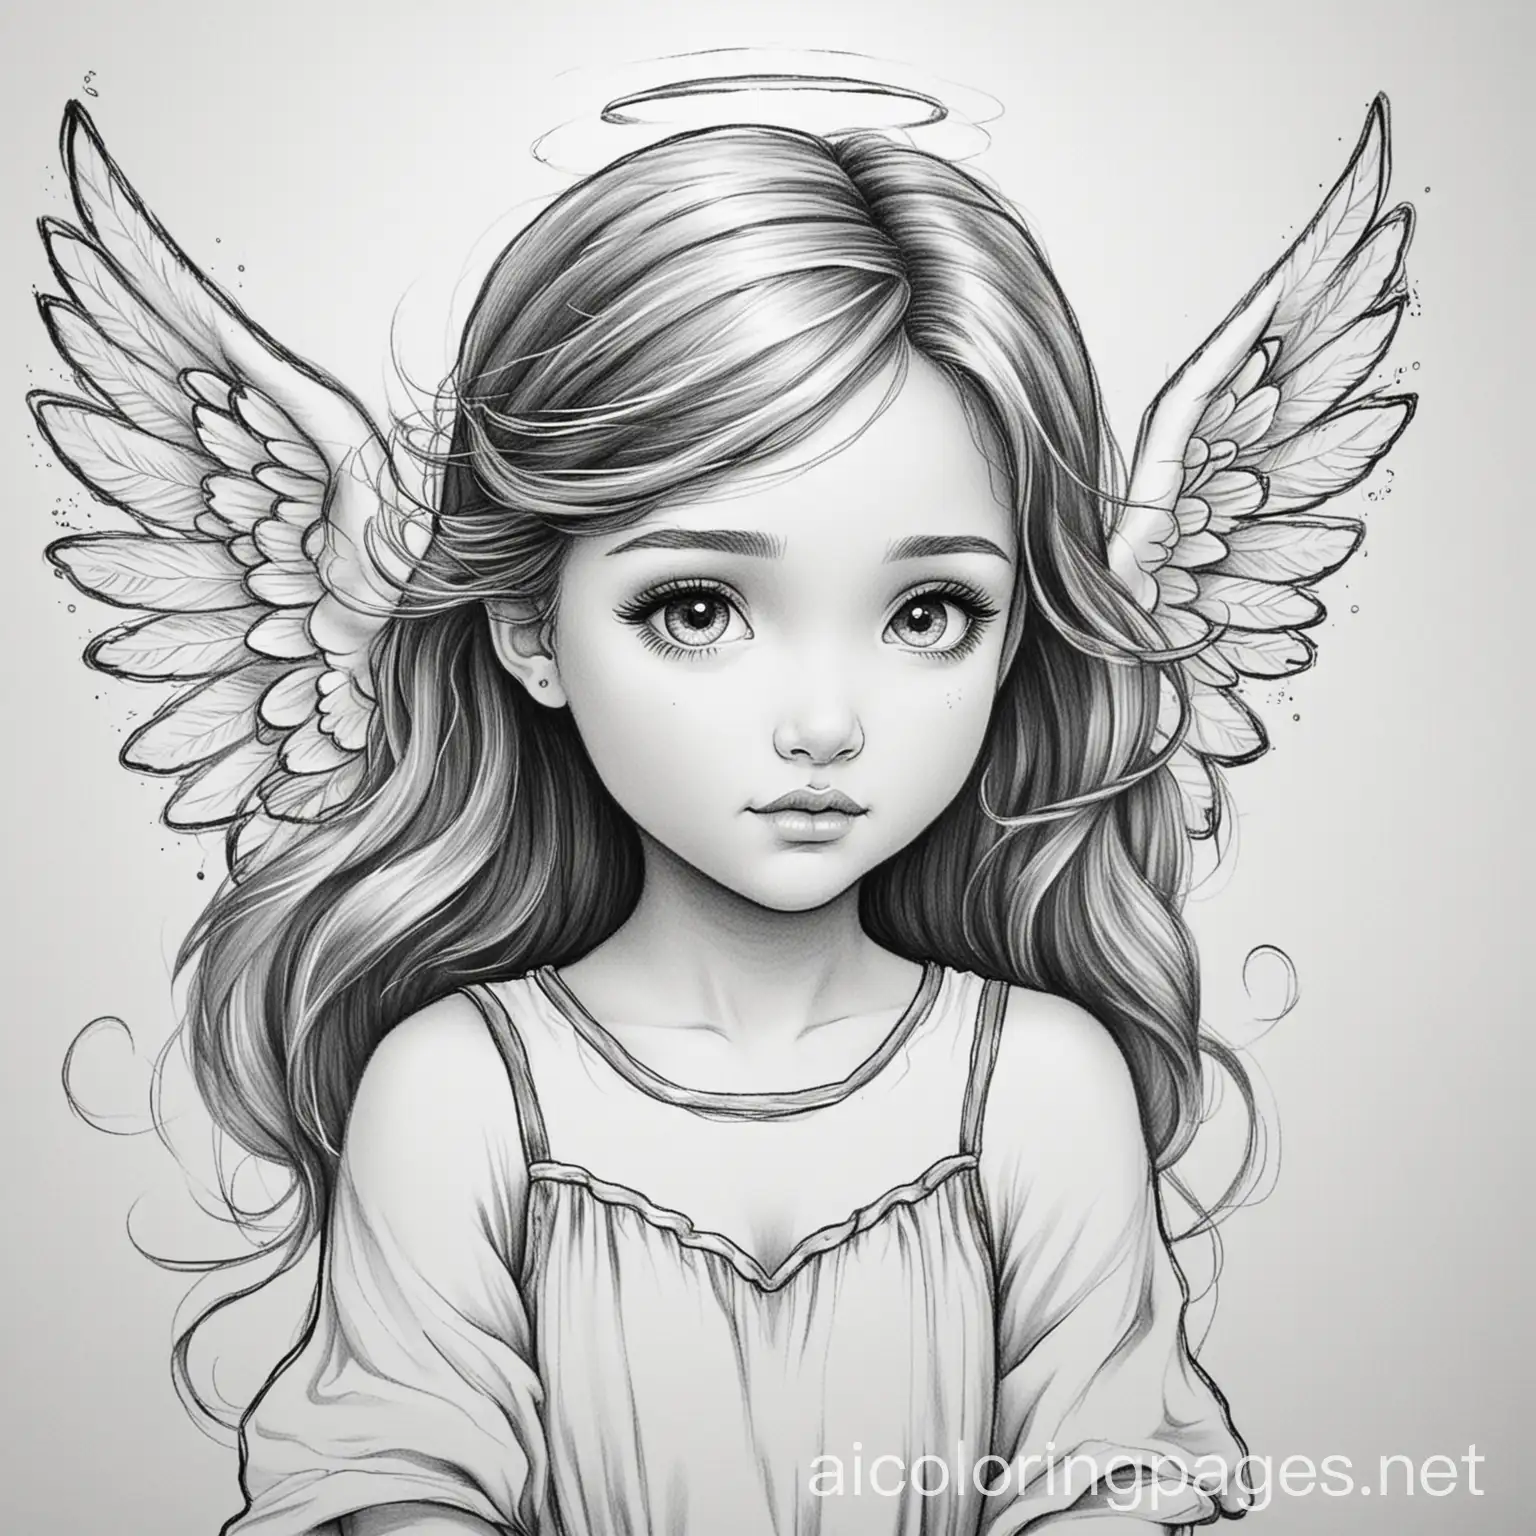 Angels girl drawing storm, Coloring Page, black and white, line art, white background, Simplicity, Ample White Space. The background of the coloring page is plain white to make it easy for young children to color within the lines. The outlines of all the subjects are easy to distinguish, making it simple for kids to color without too much difficulty